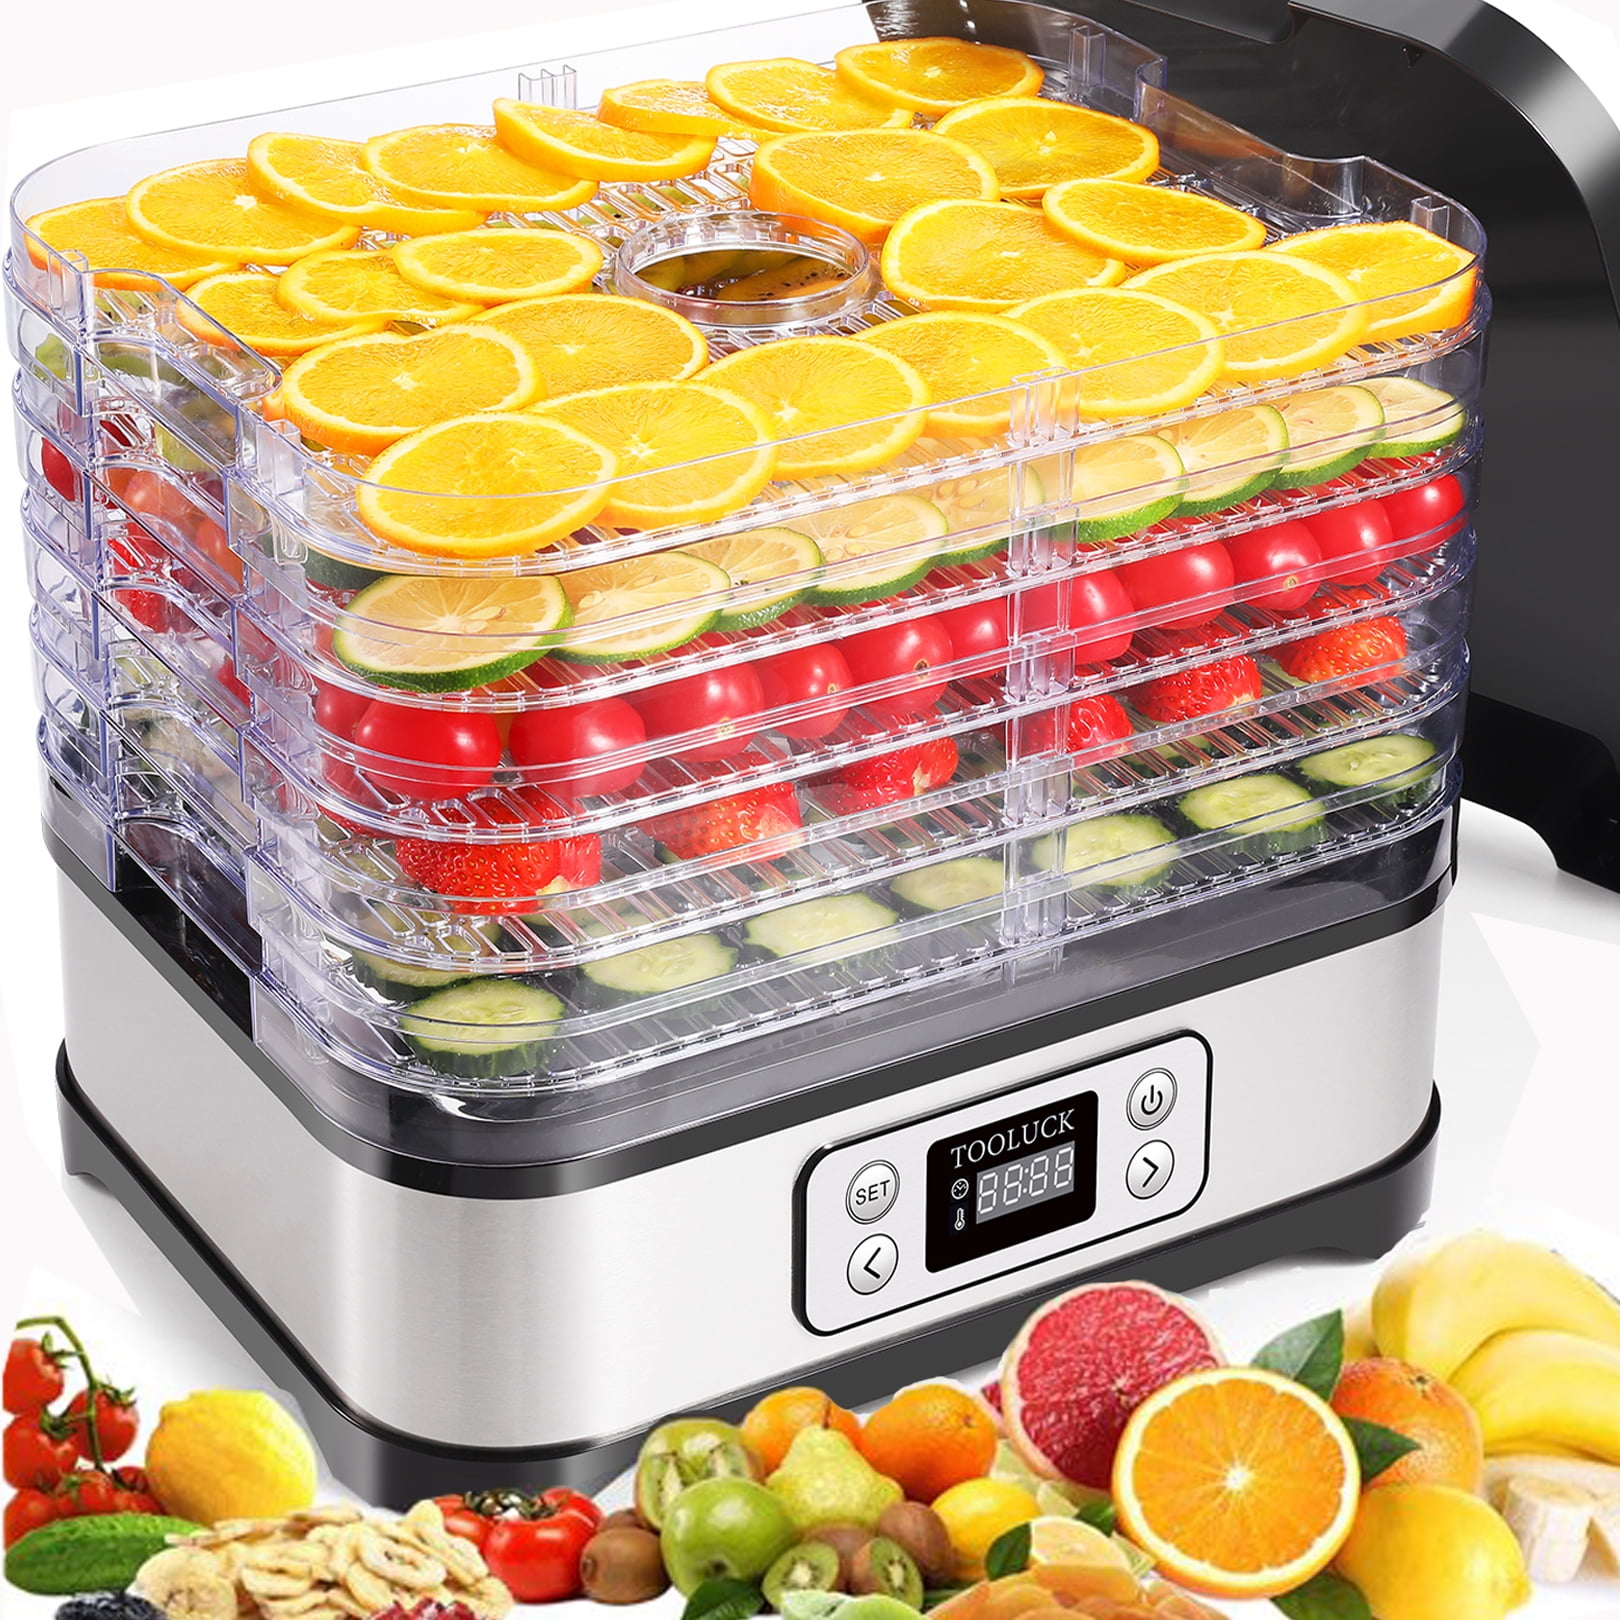 regisseur Indirect Gezond eten TOOLUCK Electric Food Dehydrator Machine,250W Power,Timer and Temperature  Settings, 5 Drying Trays, Stainless Steel, BPA Free - Perfect for Beef  Jerky, Herbs, Fruits, Vegetables - Walmart.com